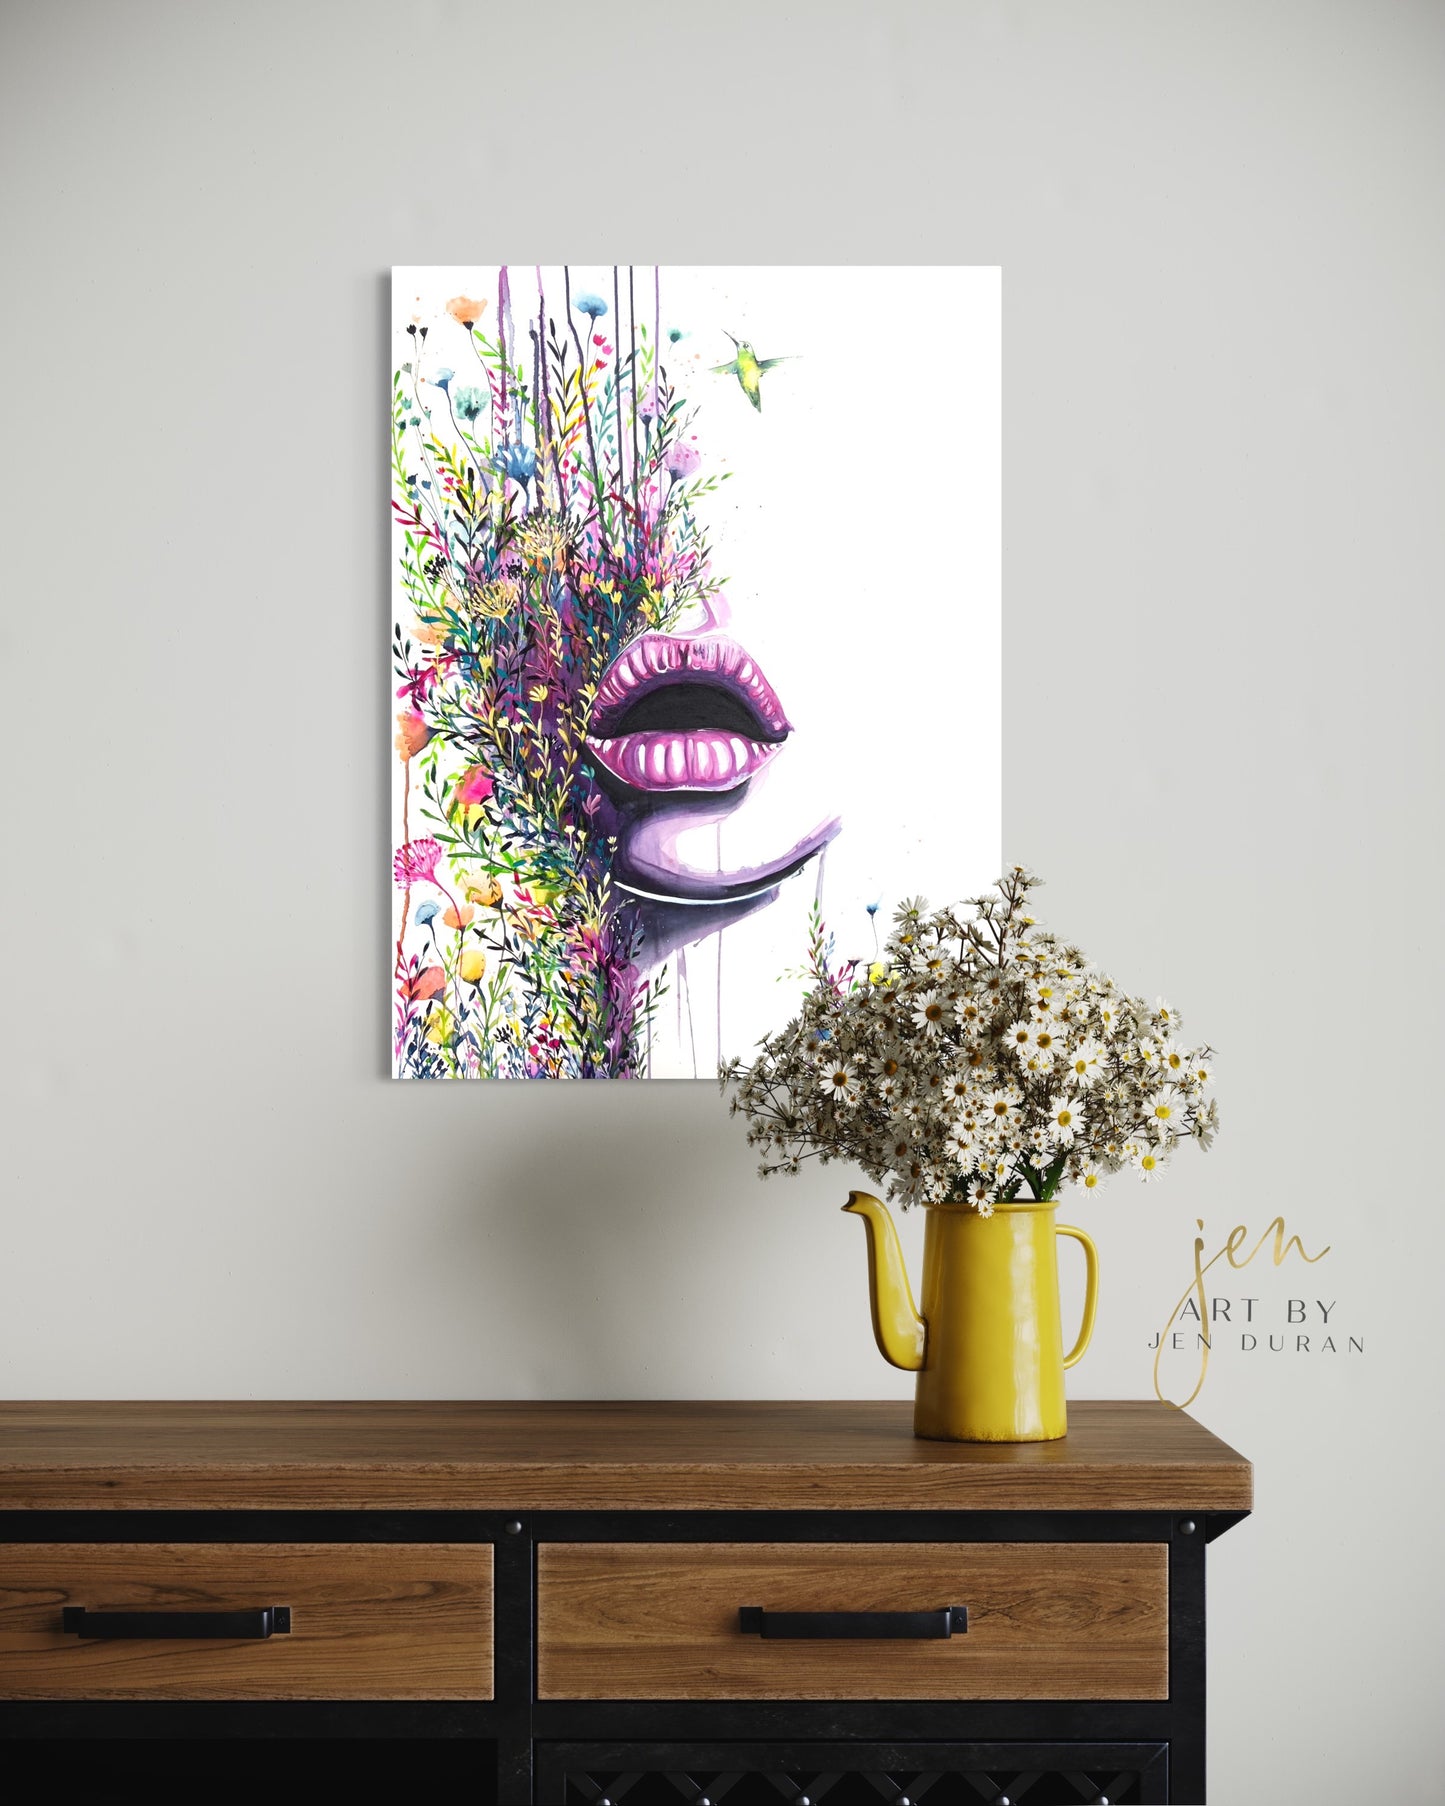 modern art, art print, abstract art, abstract watercolor, floral watercolor, floral art print, canvas wall art, wall art, home decor, modern art print, art for walls, unique home decor, best gift, unique gift ideas, art by jen duran